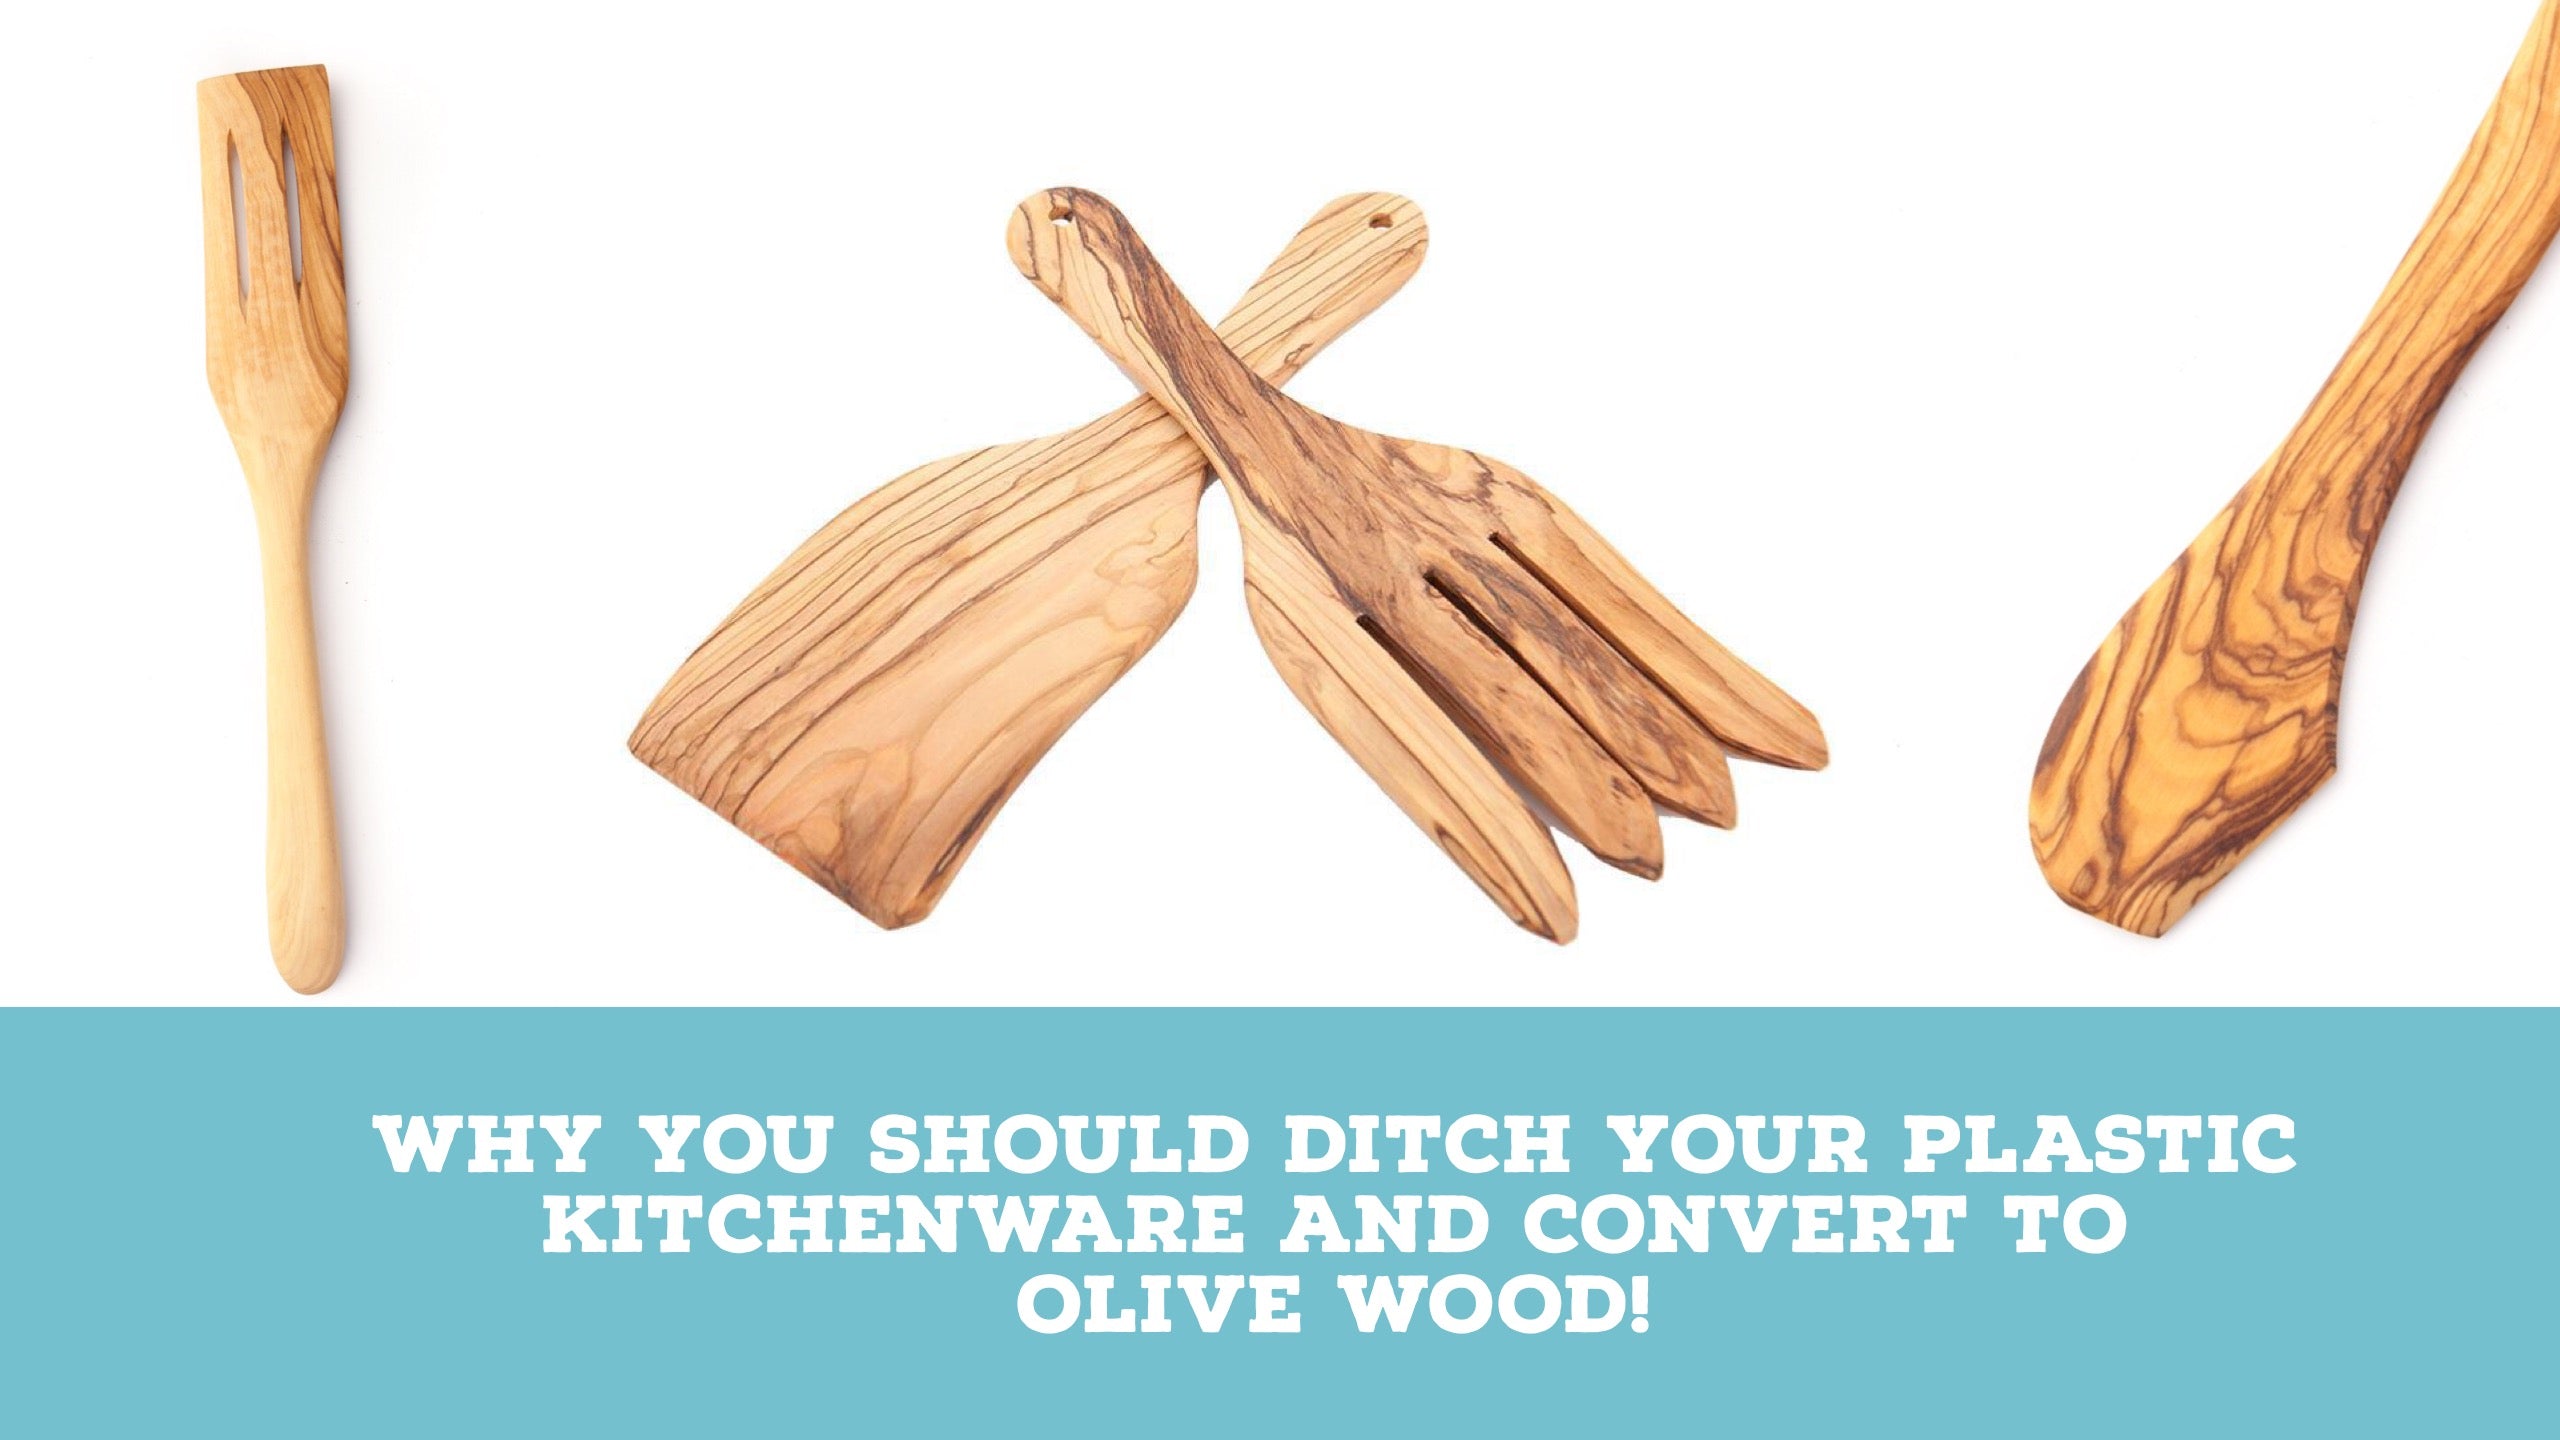 Why you should ditch your plastic kitchenware and convert to olive wood!